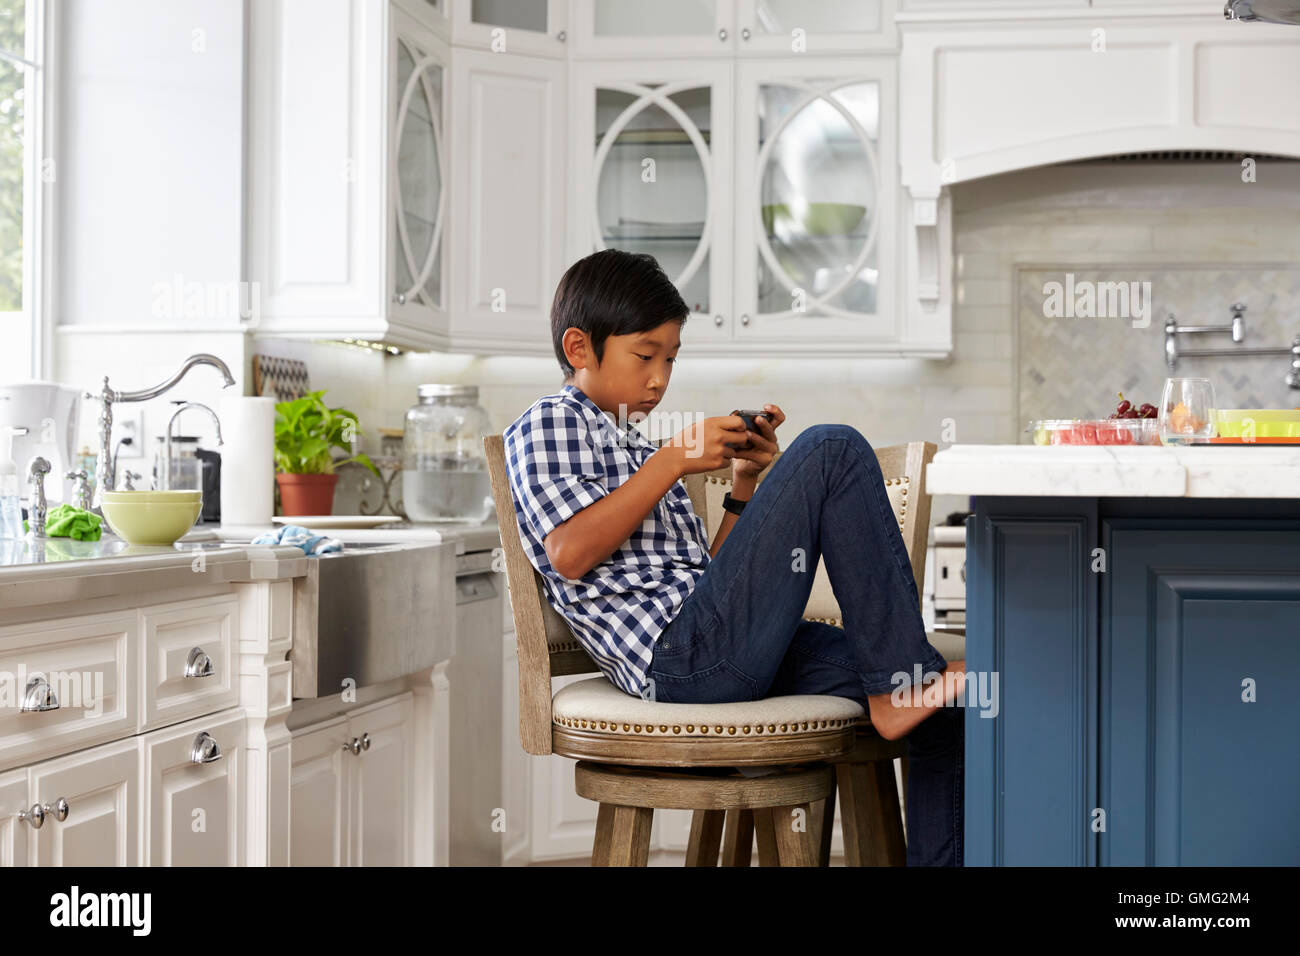 Young Asian Boy Playing Game On Mobile Device In Kitchen Stock Photo